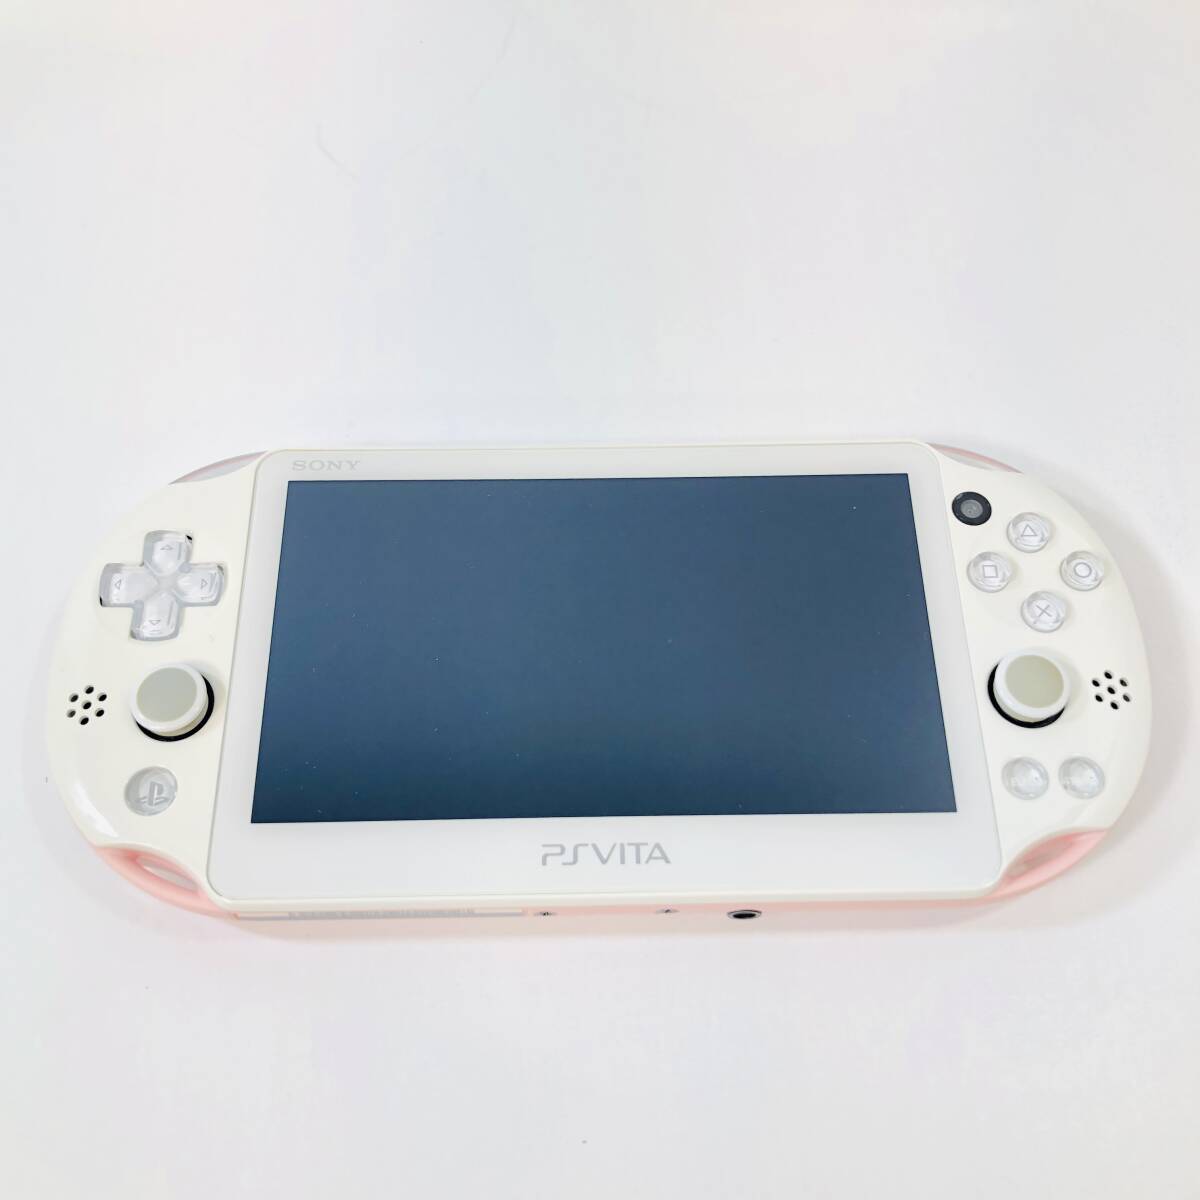 [ junk treatment /24-05-78] SONY Sony PlayStation PS Vita PCH-2000 white pink 